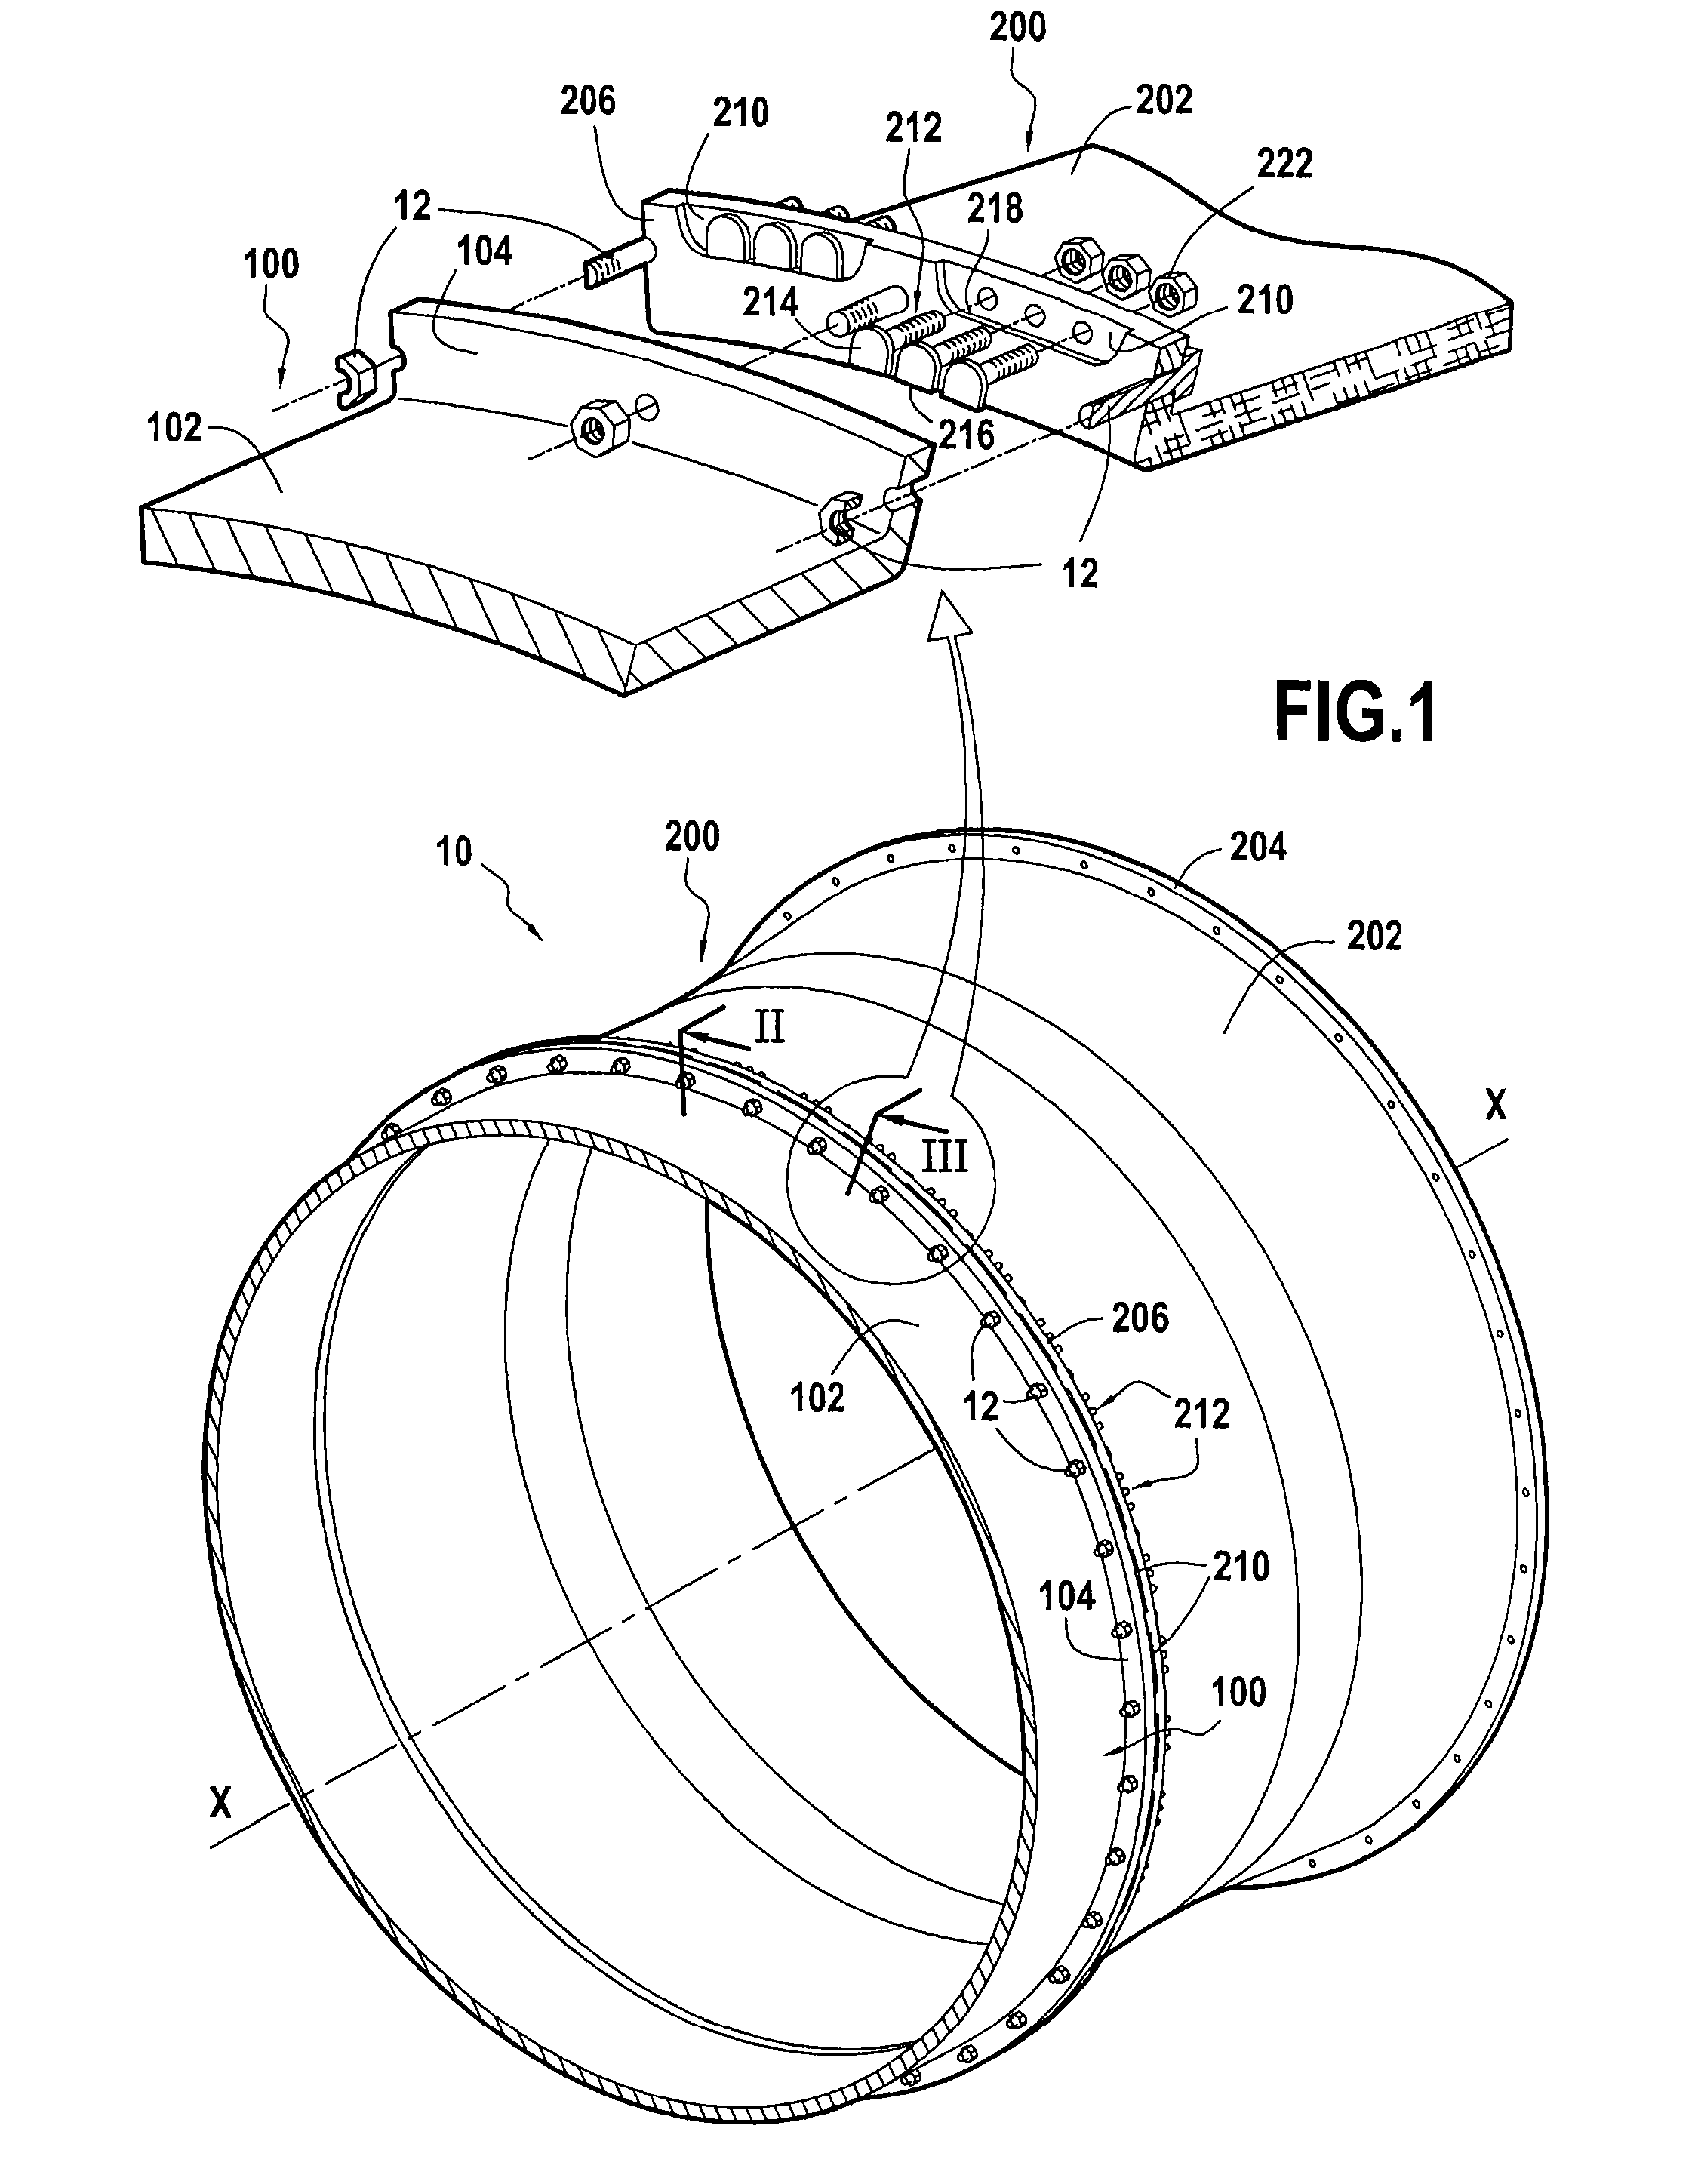 Gas turbine engine fan casing having a flange for fastening pieces of equipment